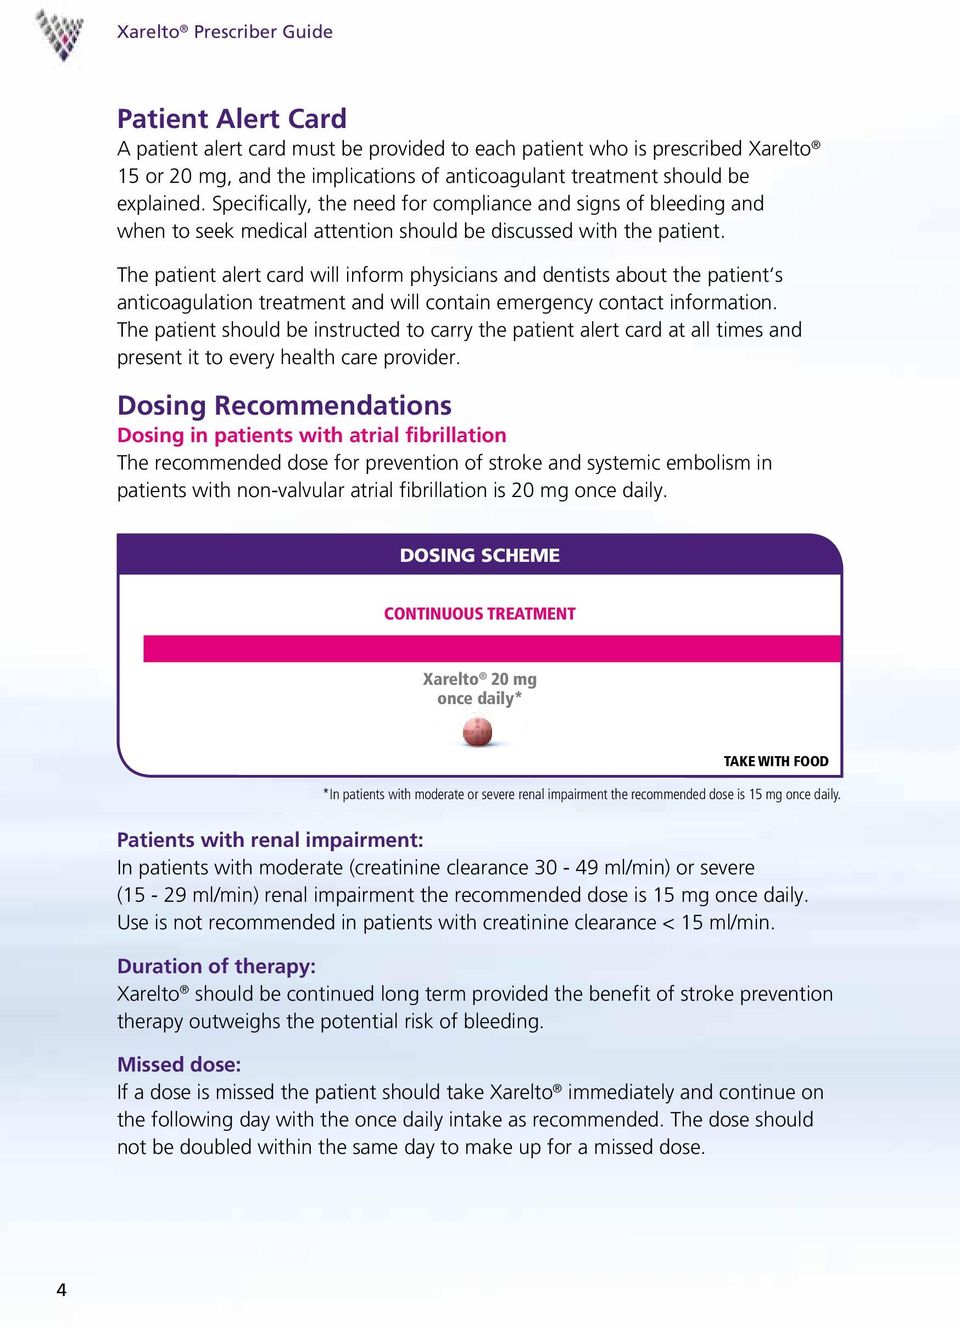 The patient alert card will inform physicians and dentists about the patient s anticoagulation treatment and will contain emergency contact information.